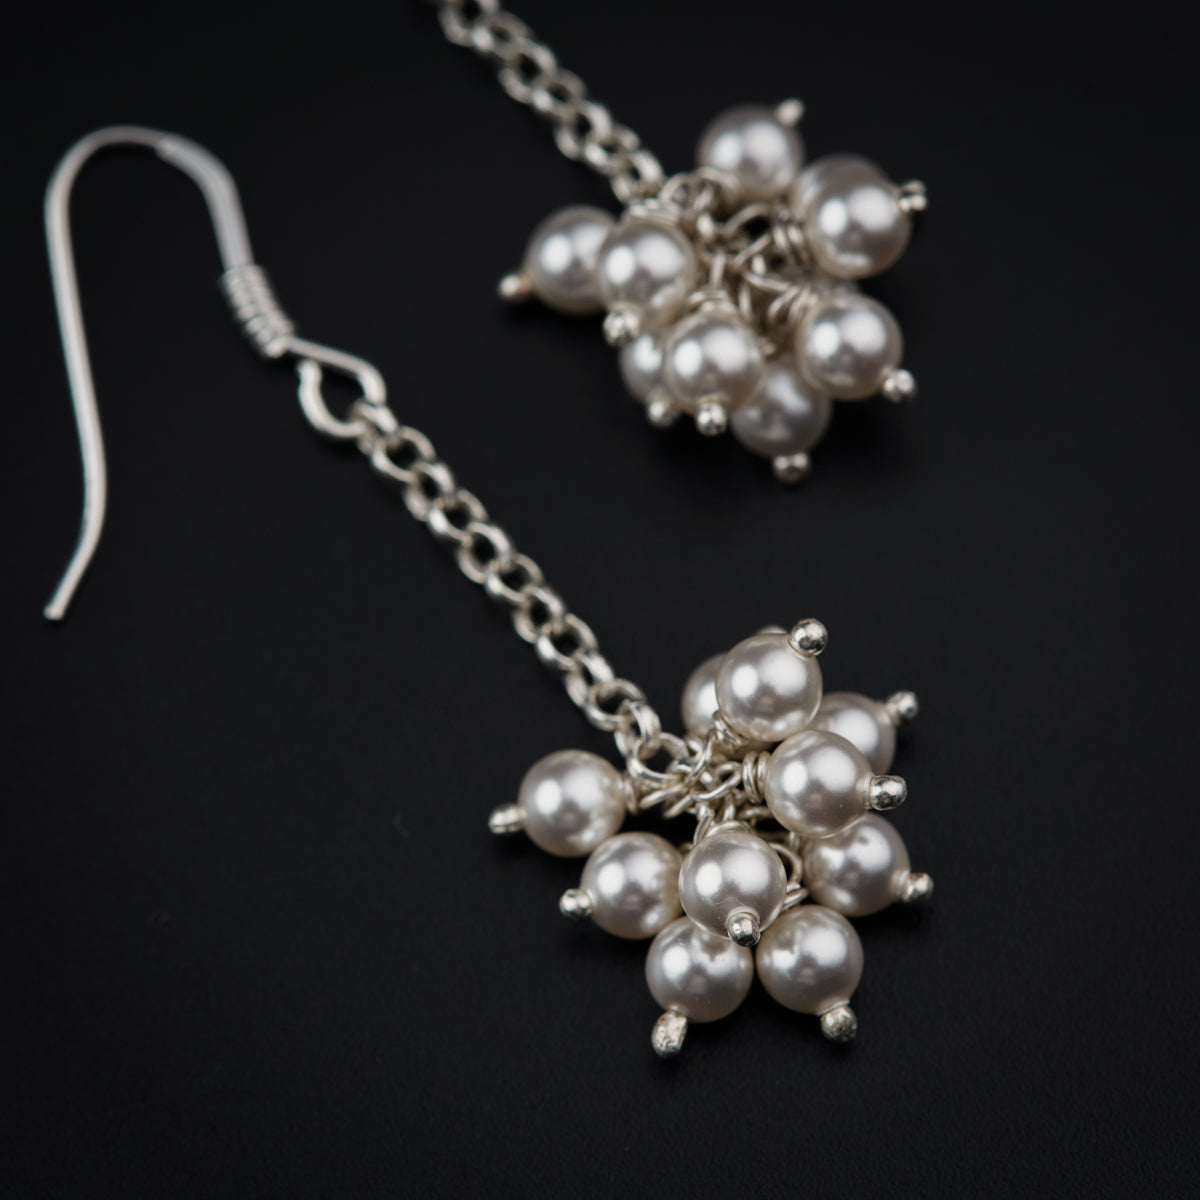 a pair of silver and pearl earrings on a black background